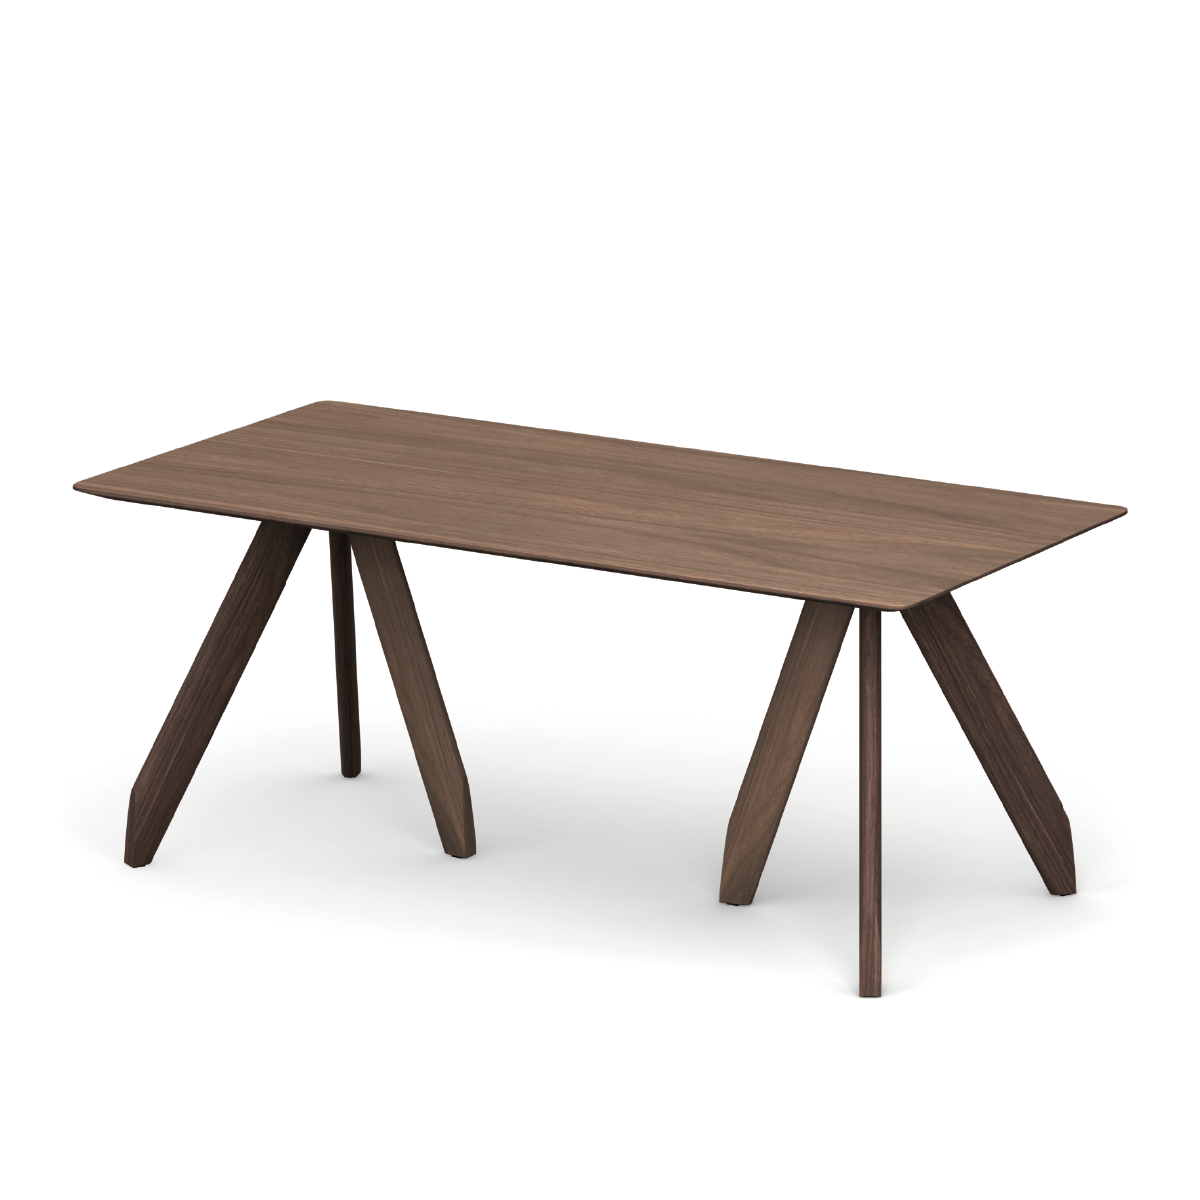 DT01 Table from ¥3,988